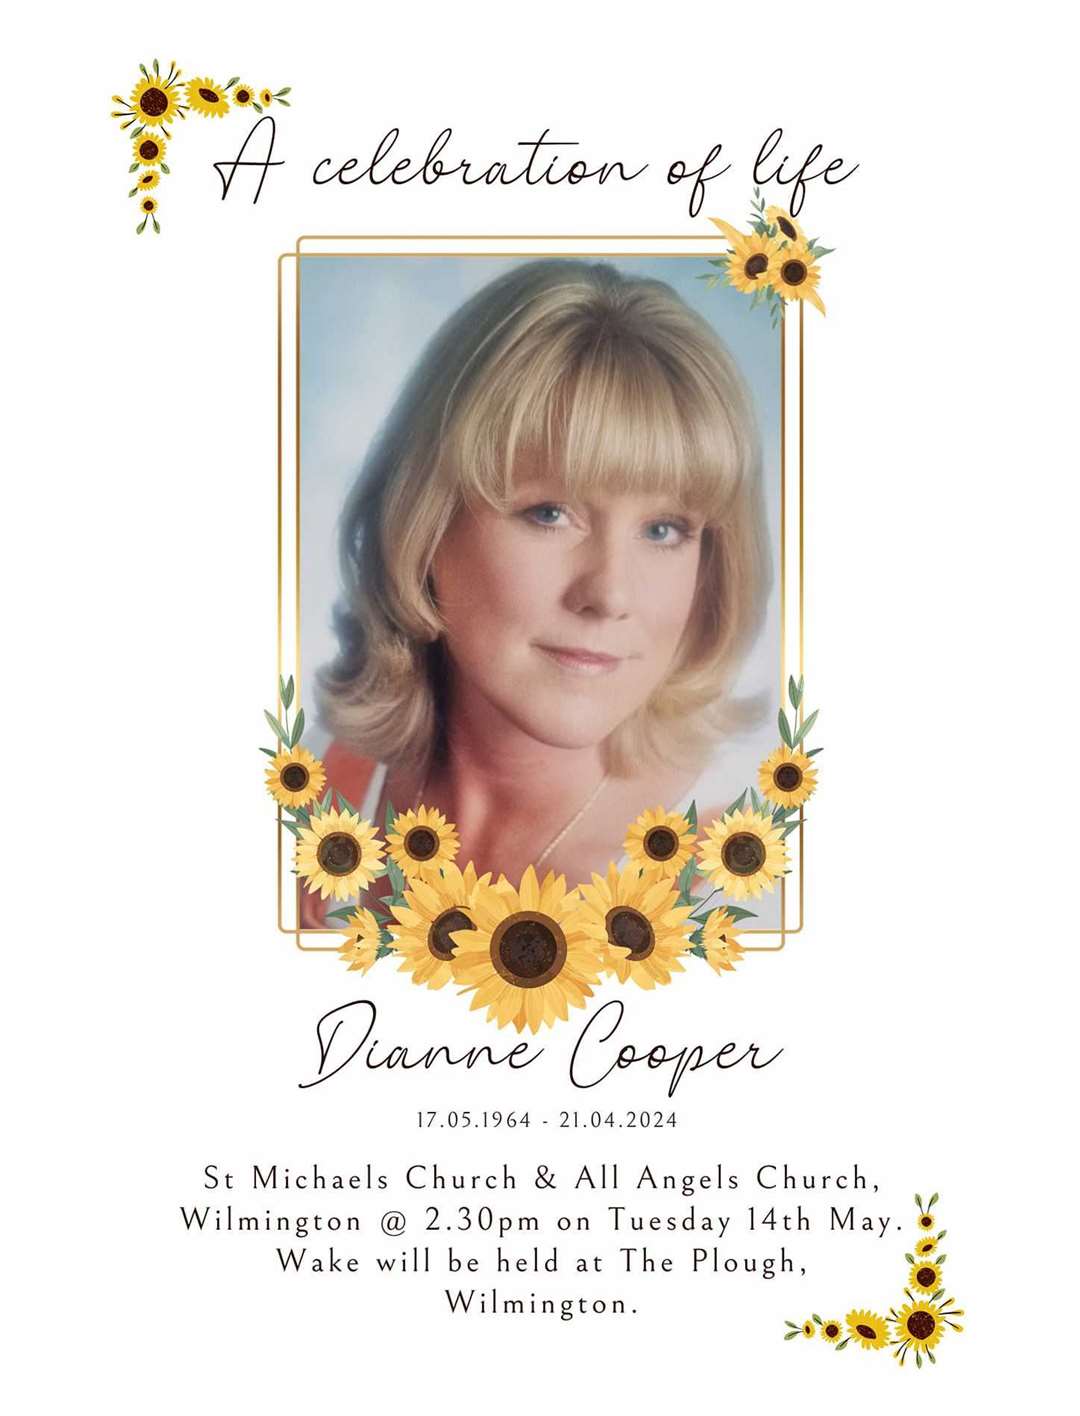 Dianne Cooper will be remembered on May 14. Picture: Shannon Yassir